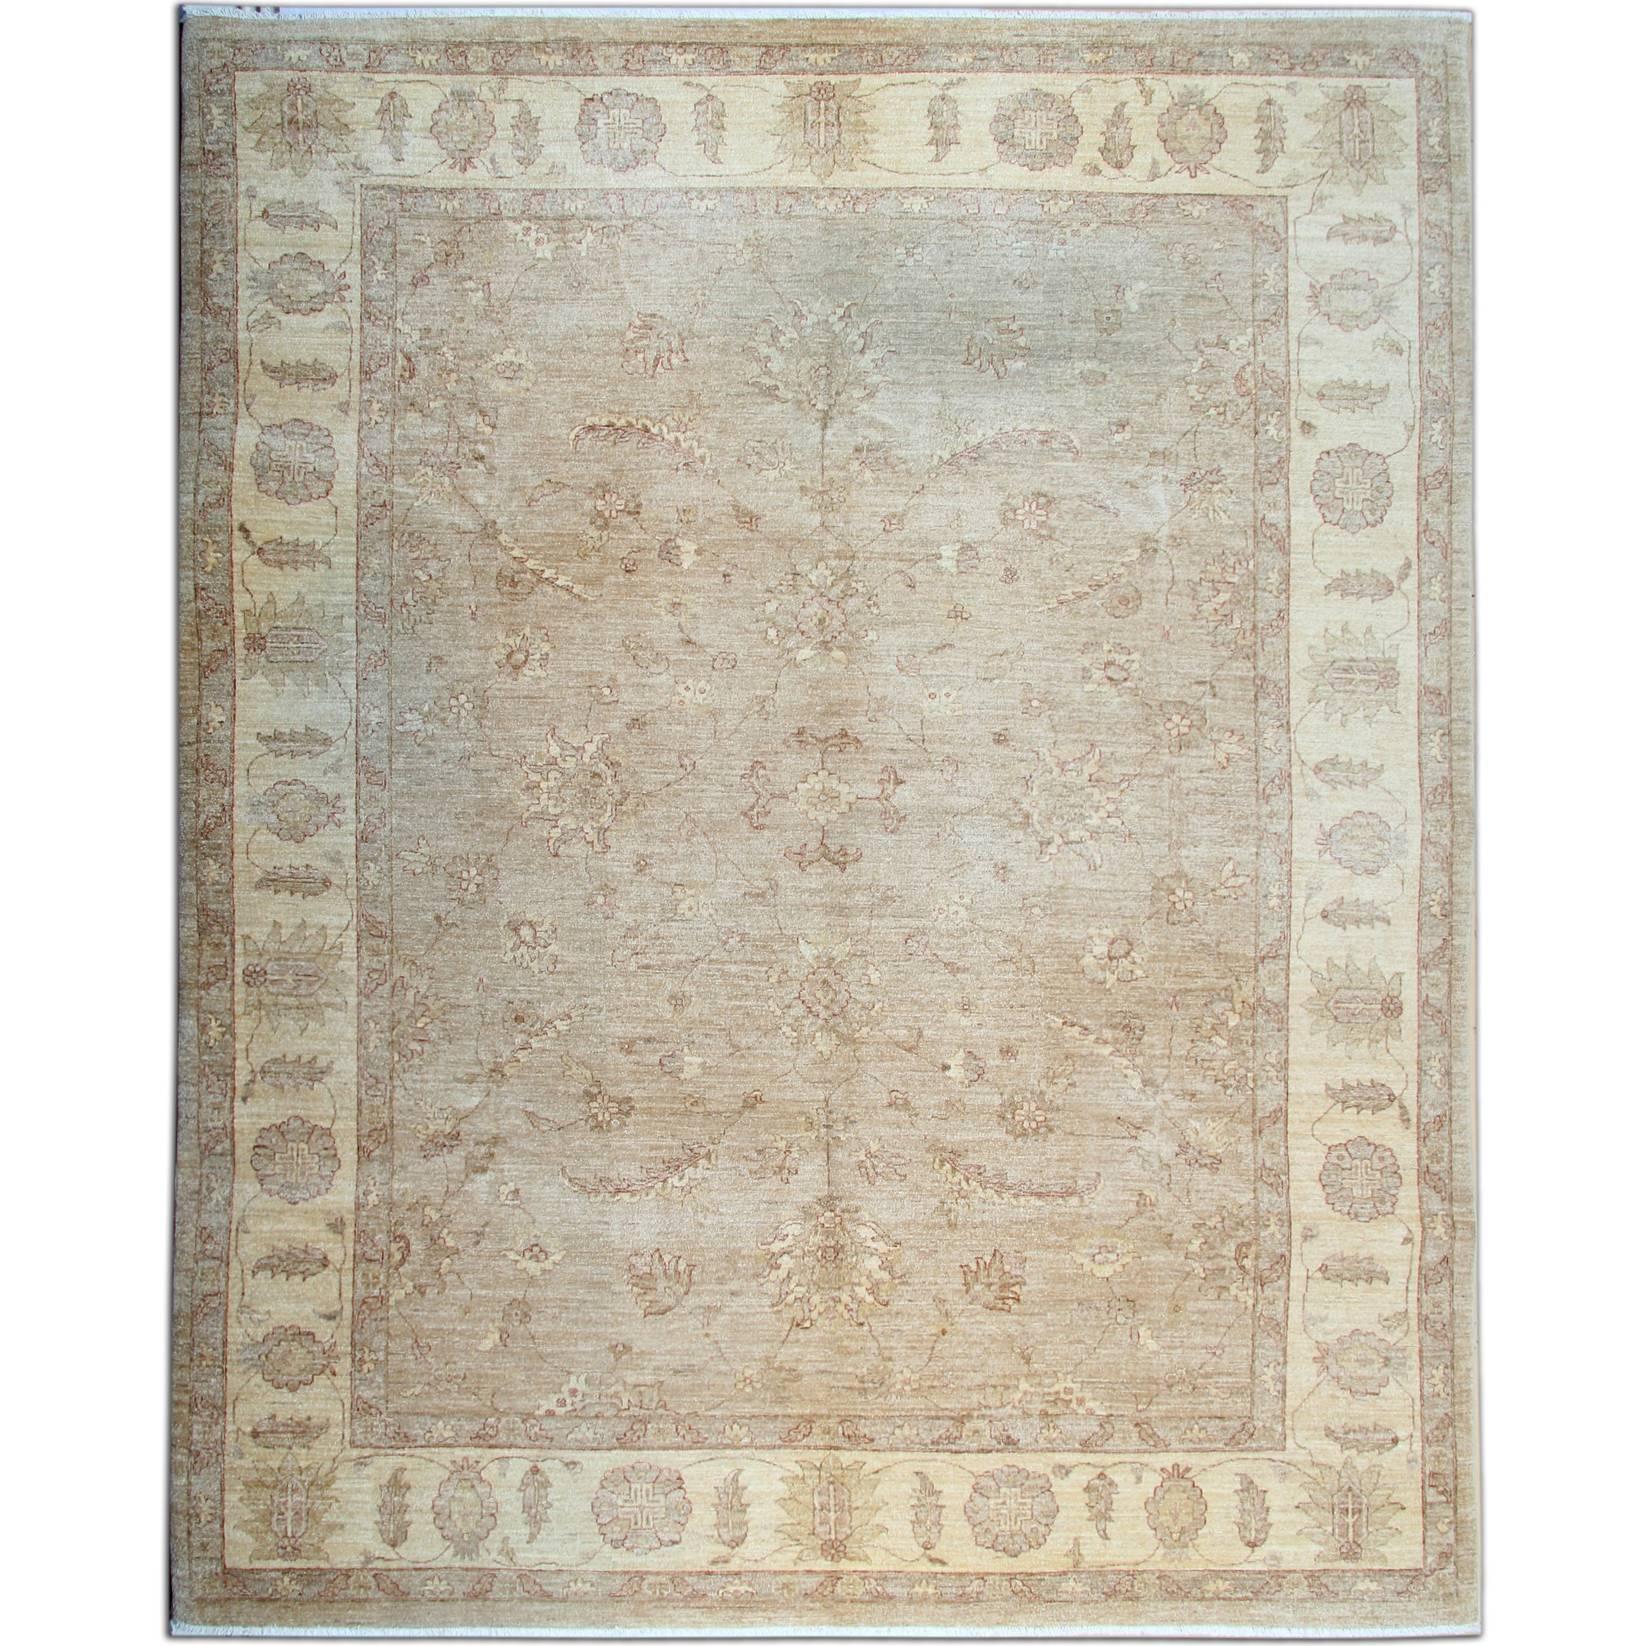 Light Brown Persian Style Rugs, living room rugs with Persian Rugs Design